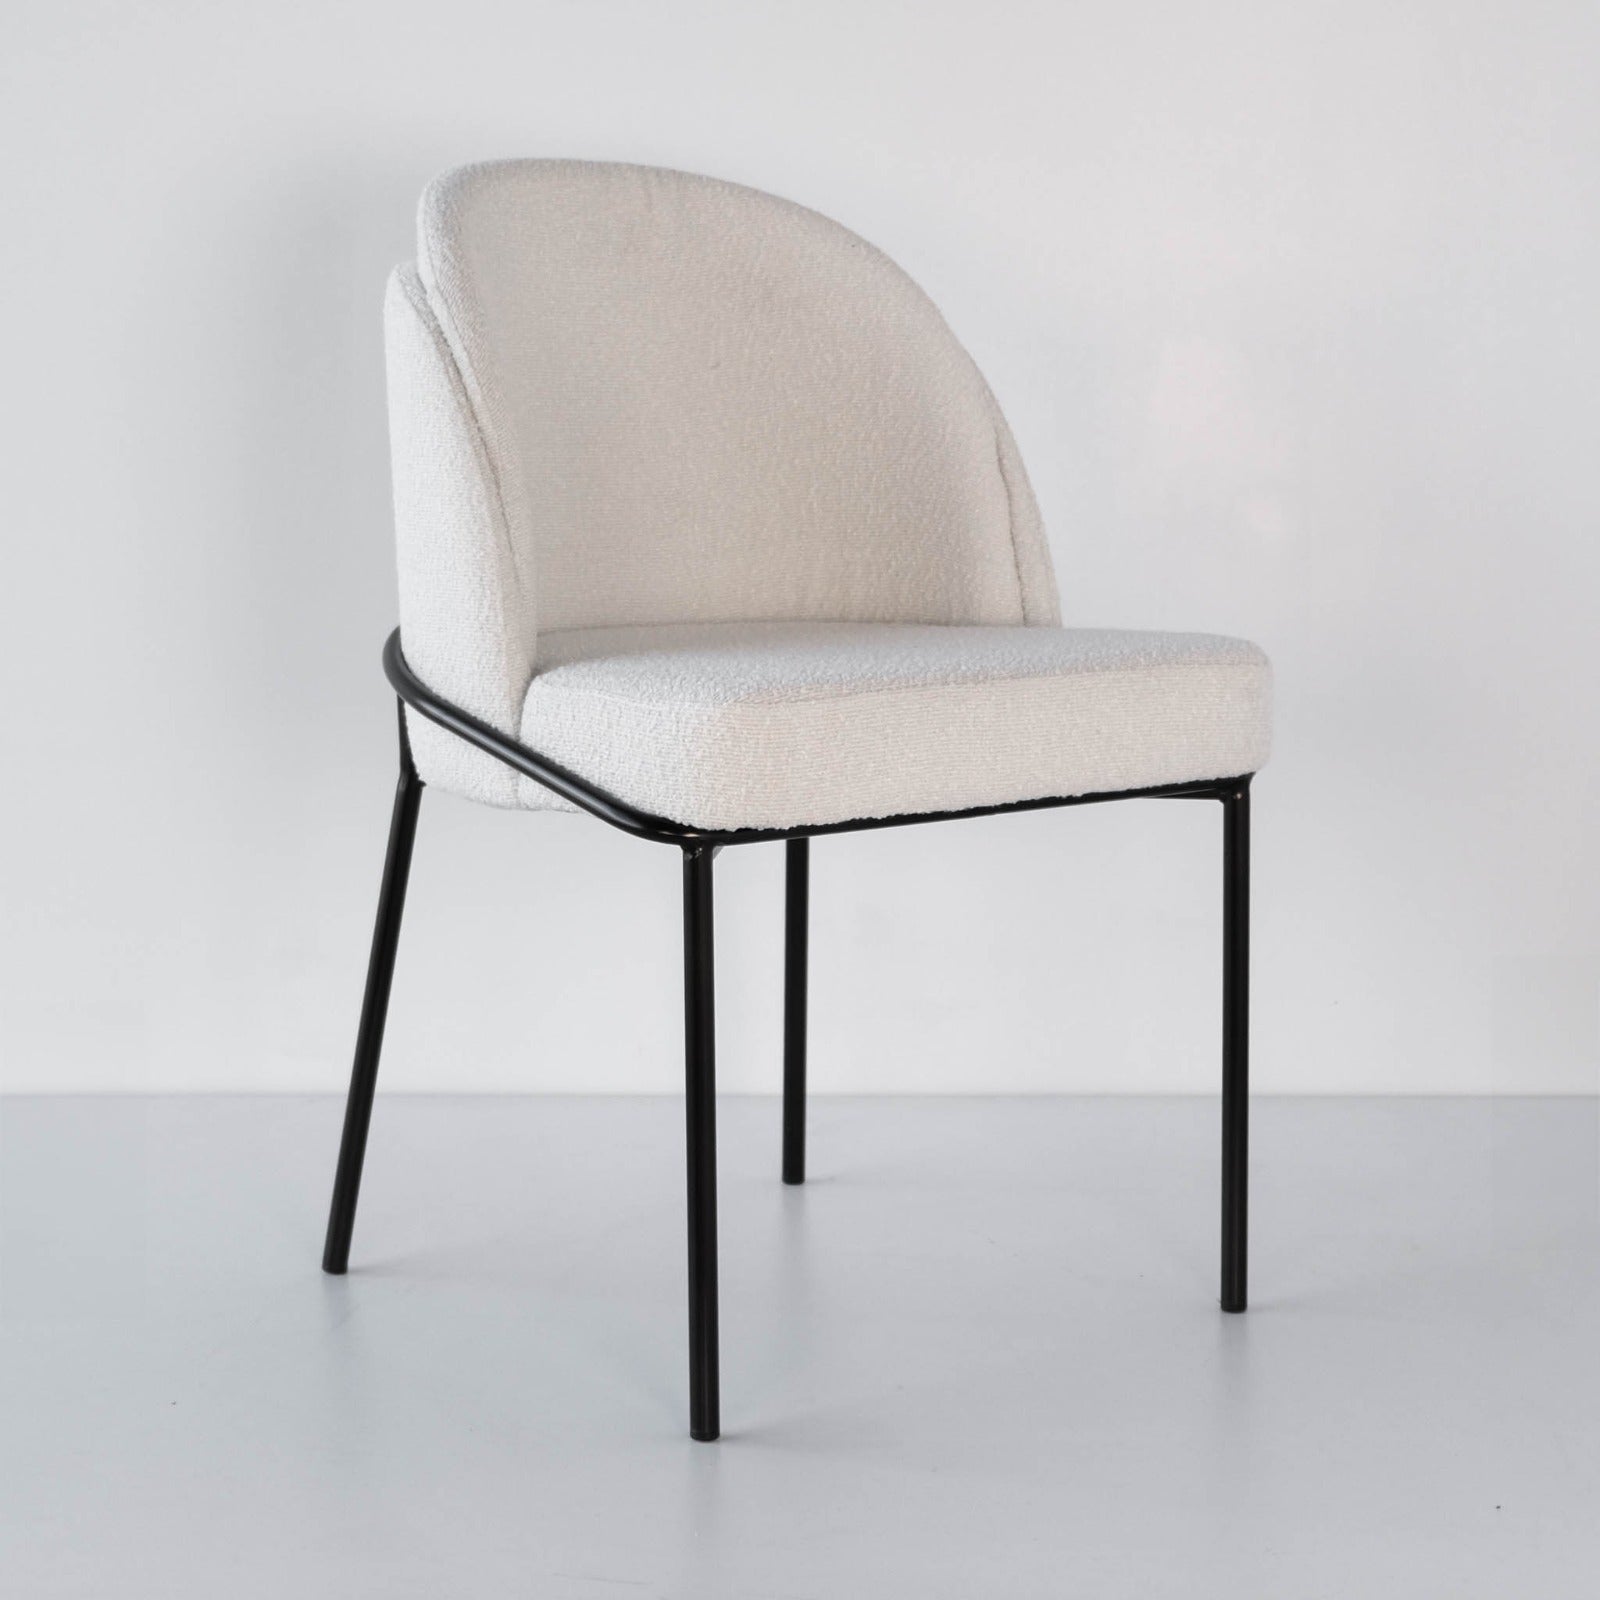 Angle view of a modern boucle dining chair, showcasing its elegant design and textured fabric